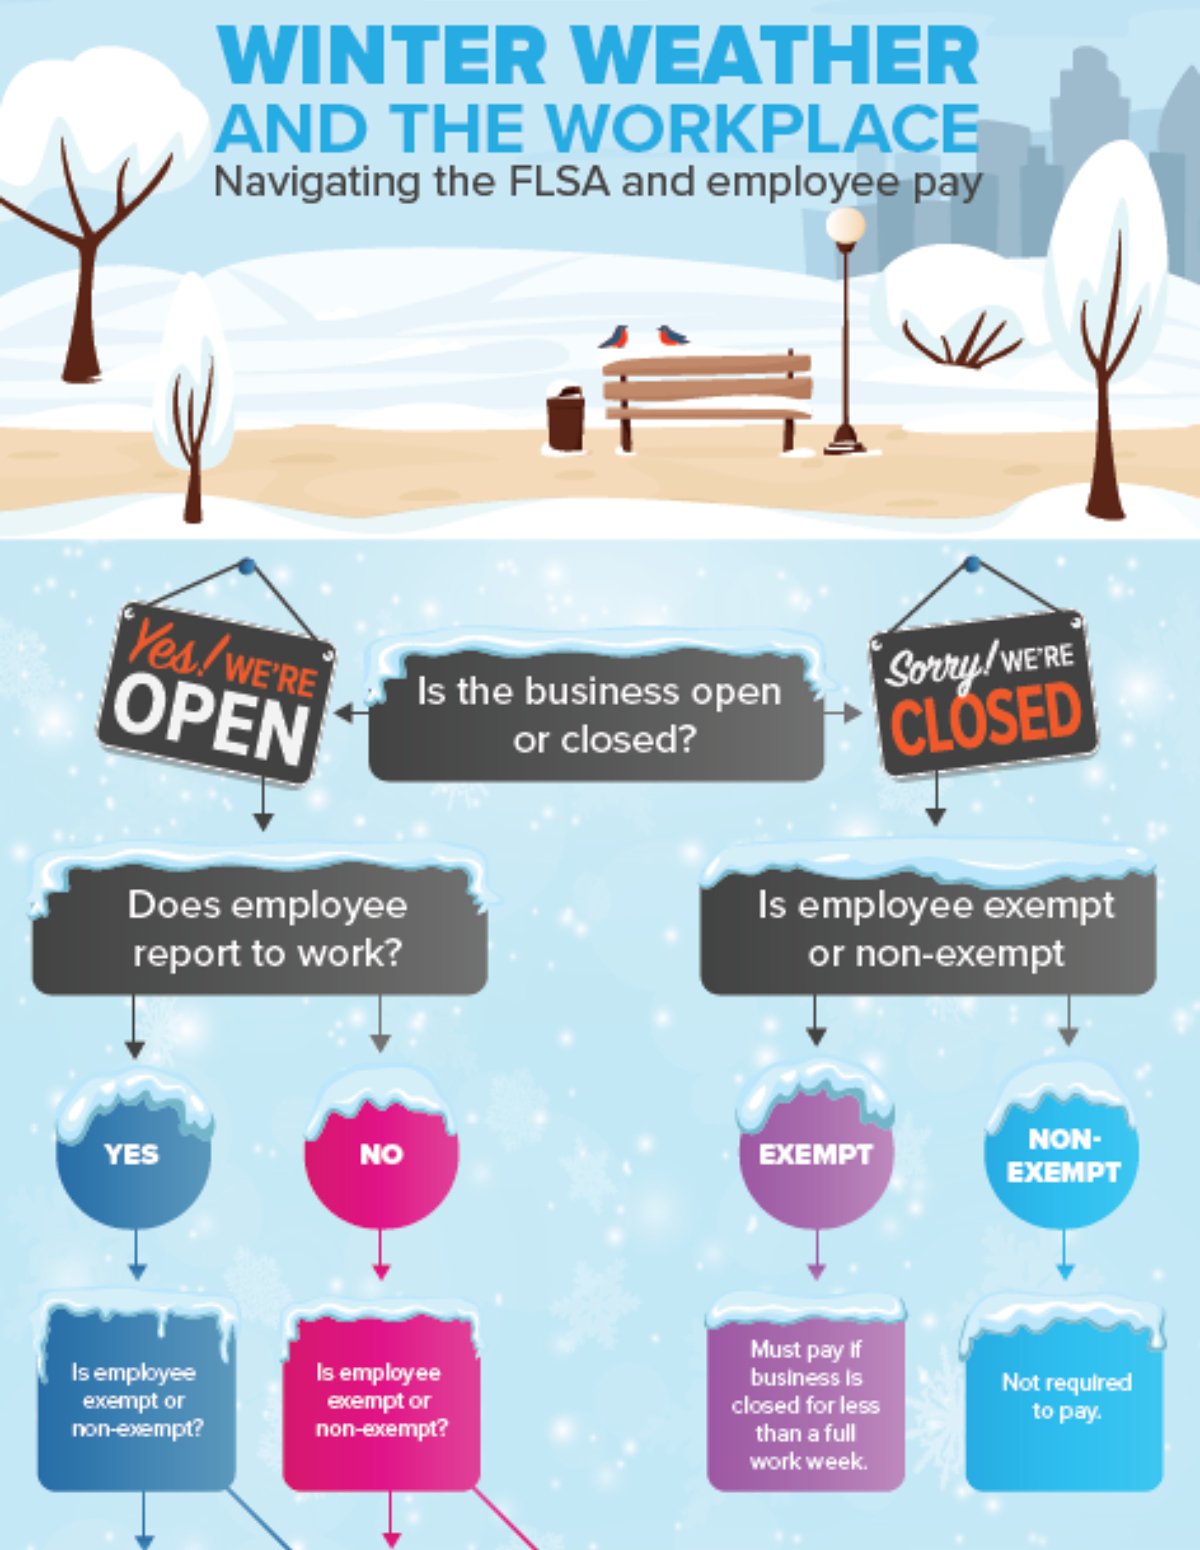 Navigating winter weather workplace closings, the FLSA, and employee pay